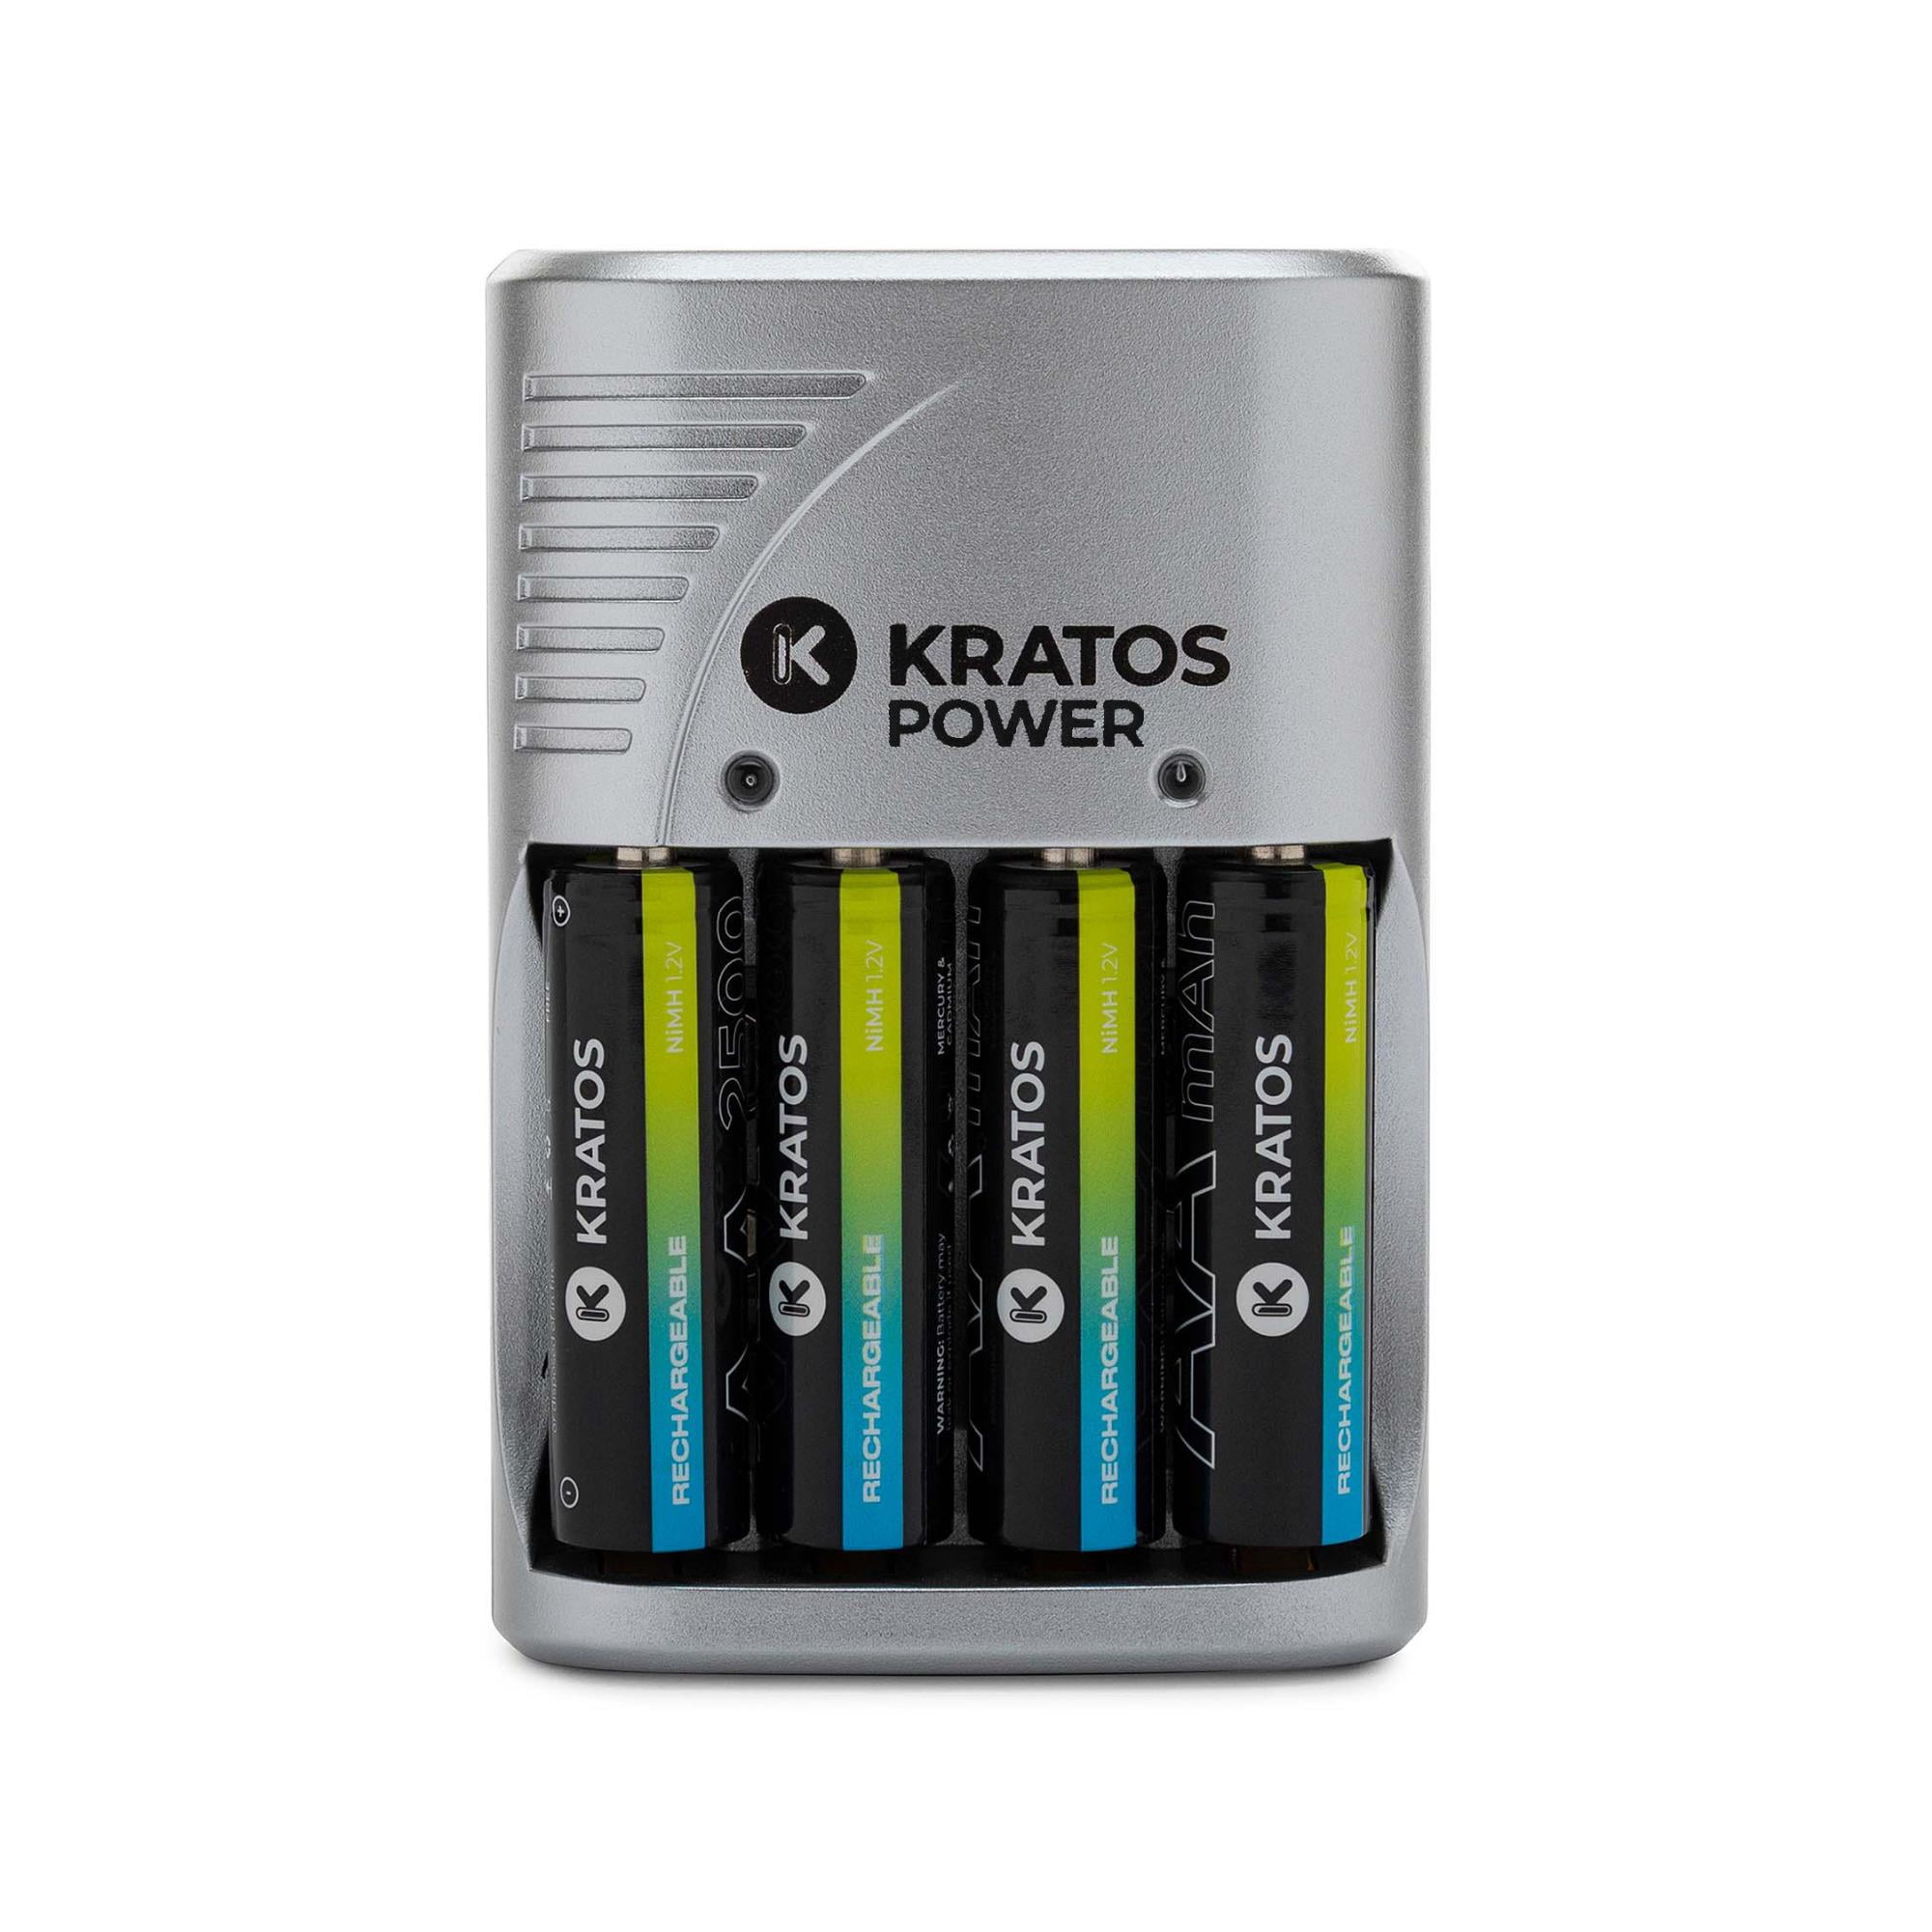 Compare prices for Kratax across all European  stores